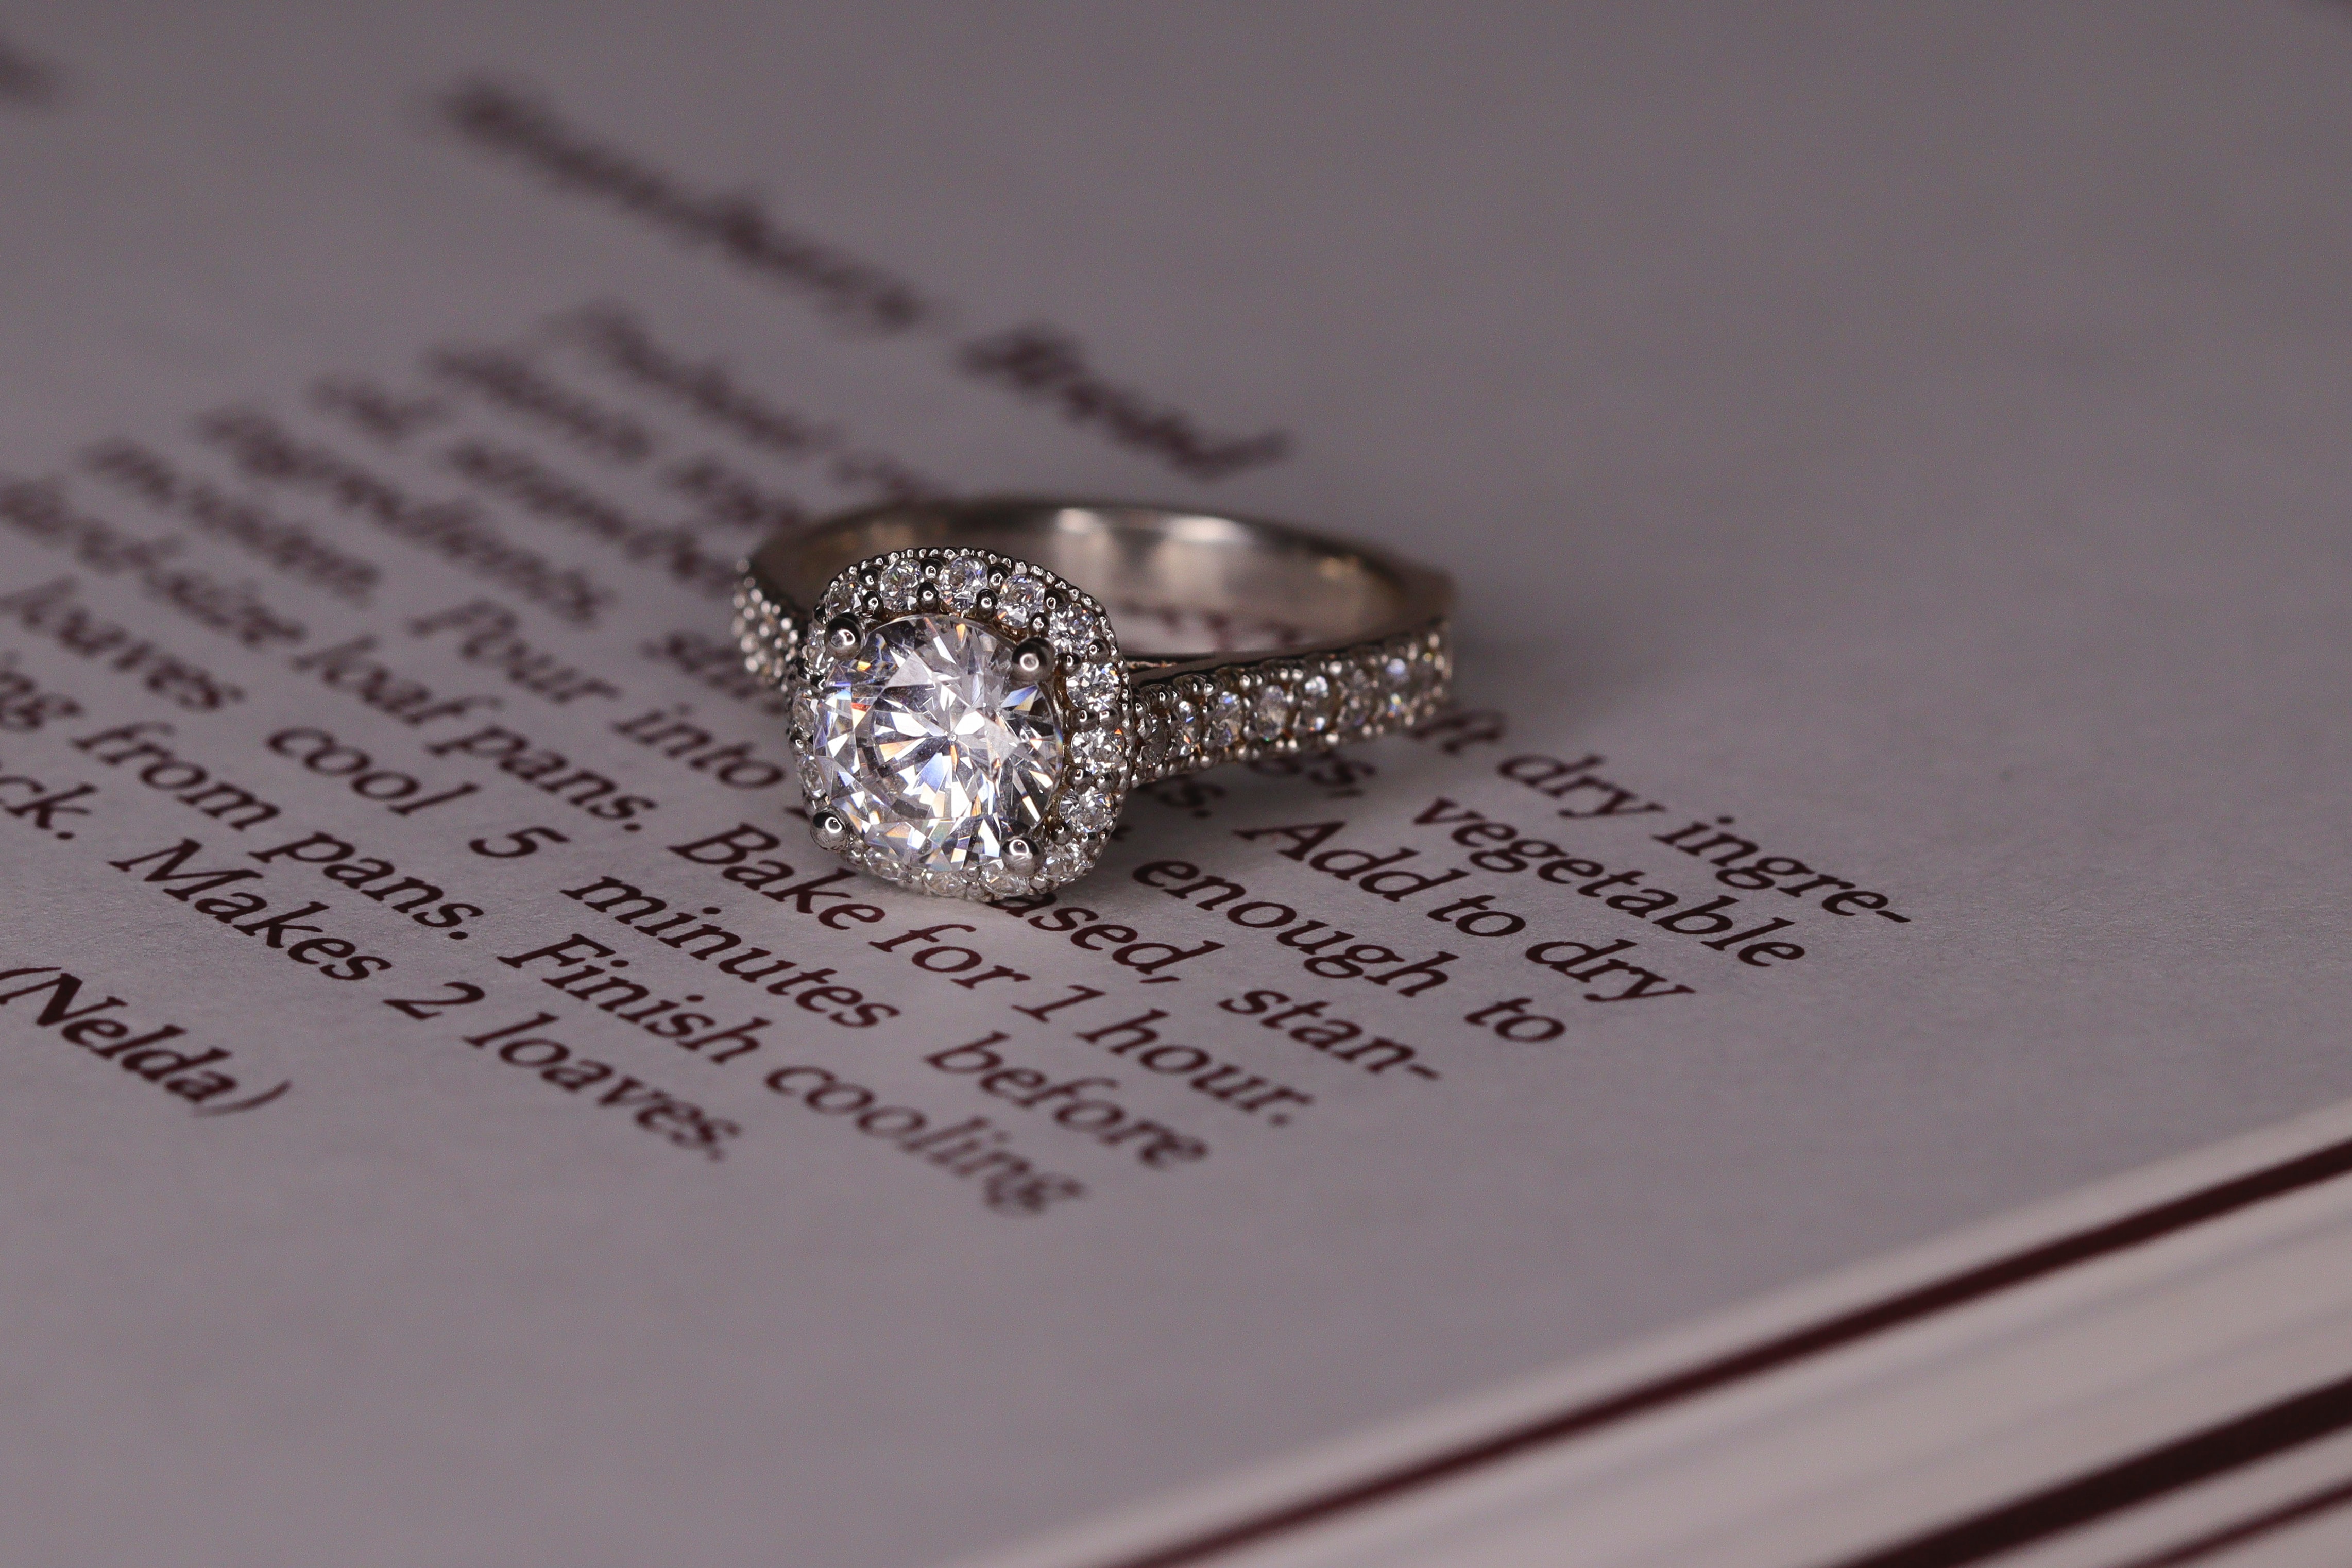 A cushion cut ring features one large stone with smaller stones surrounding the band.